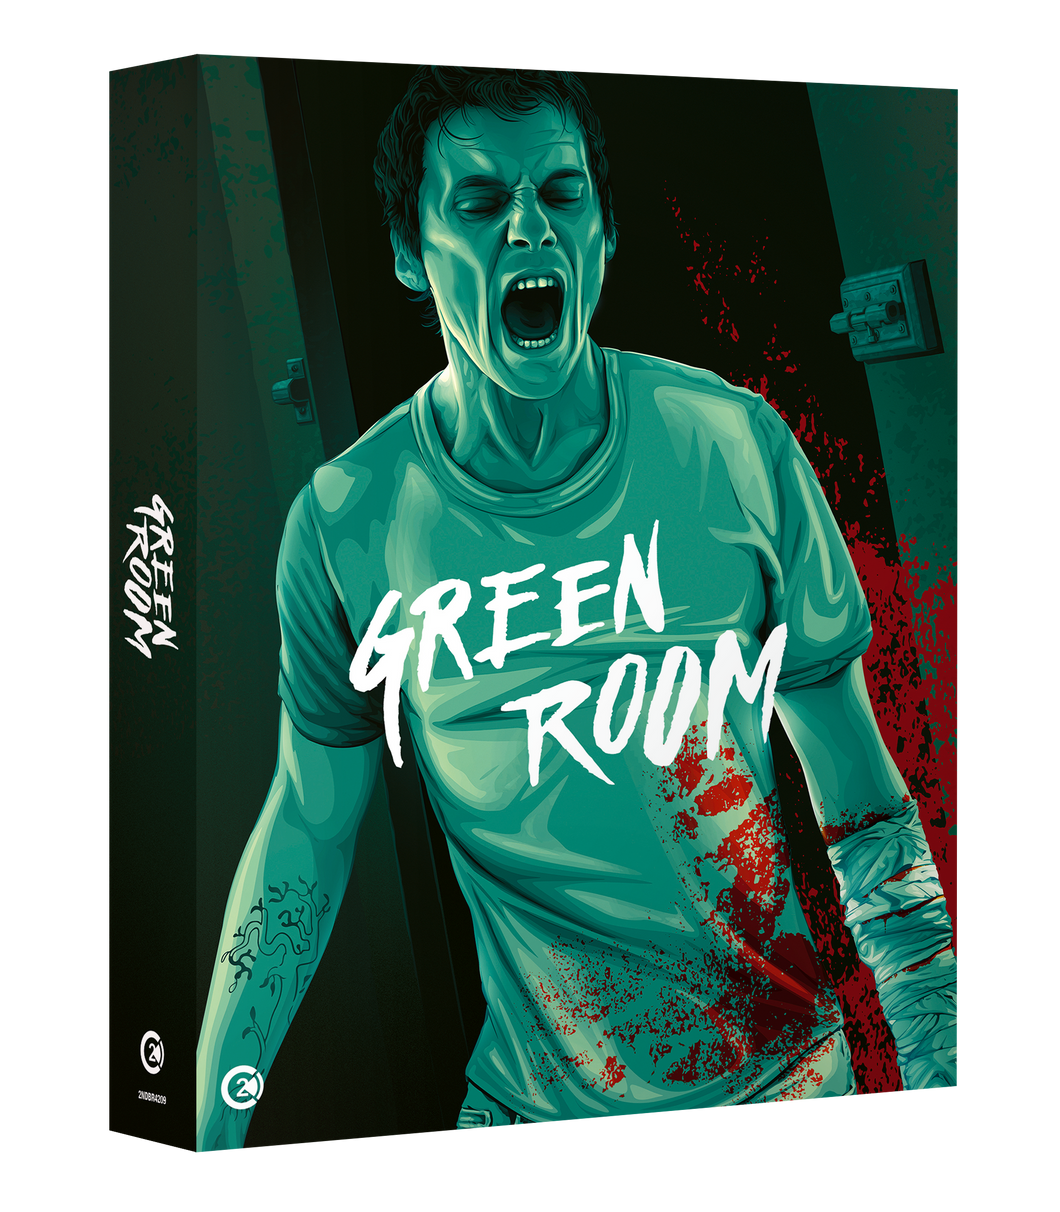 Green Room Limited Edition 4K UHD & Blu-ray – Second Sight Films